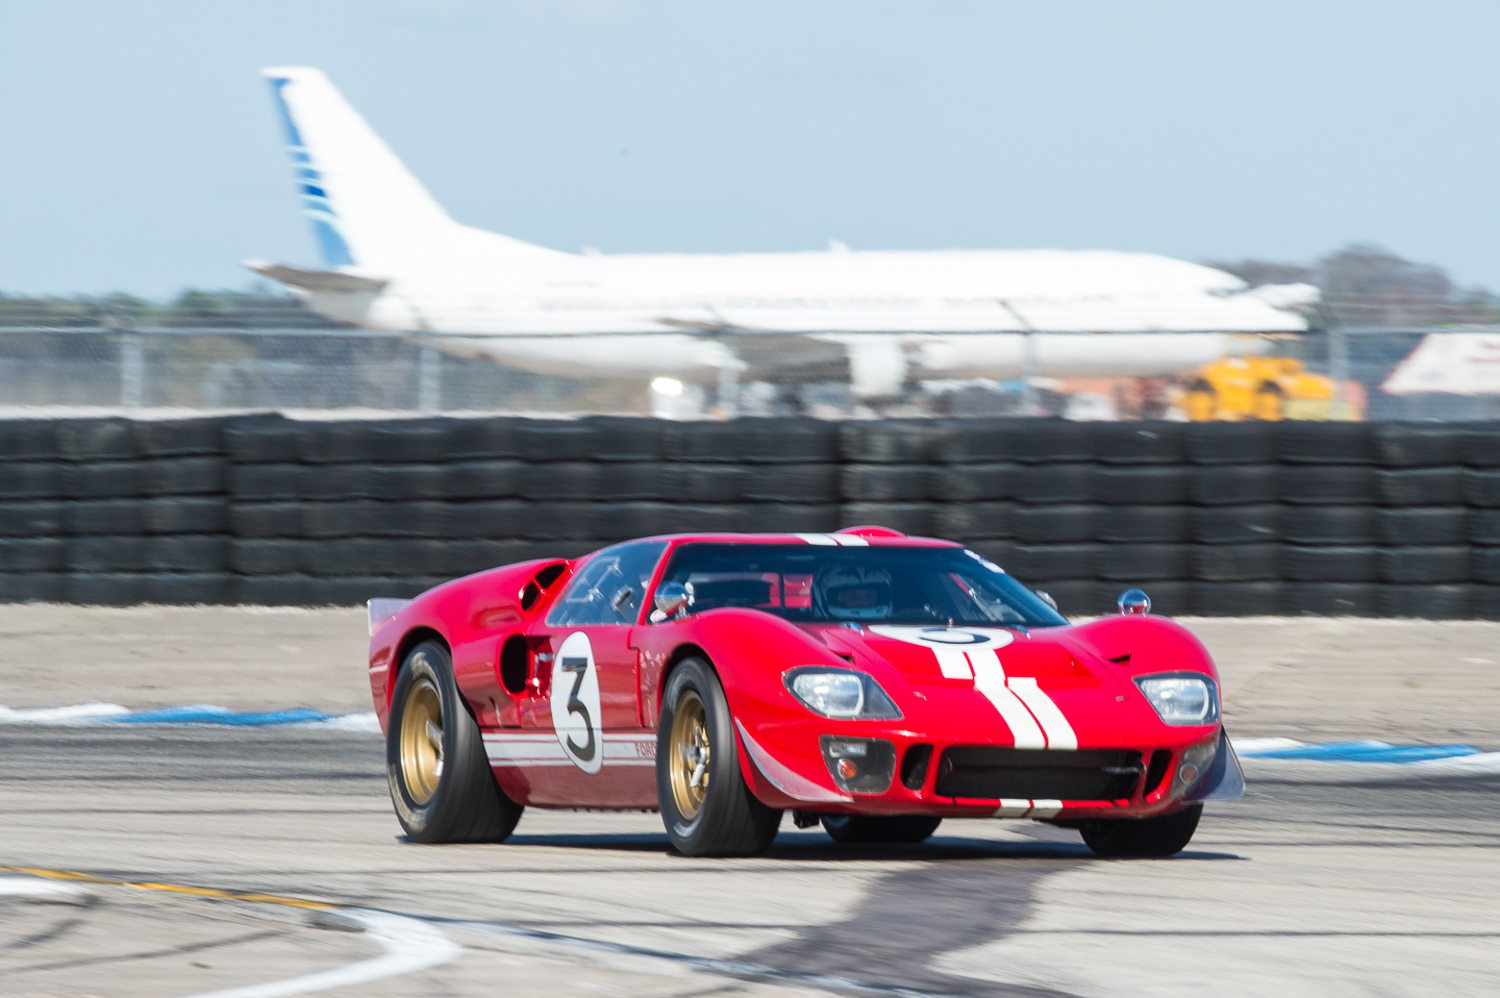 Vintage sportscar racing features at the SVRA Sebring Speedtour event